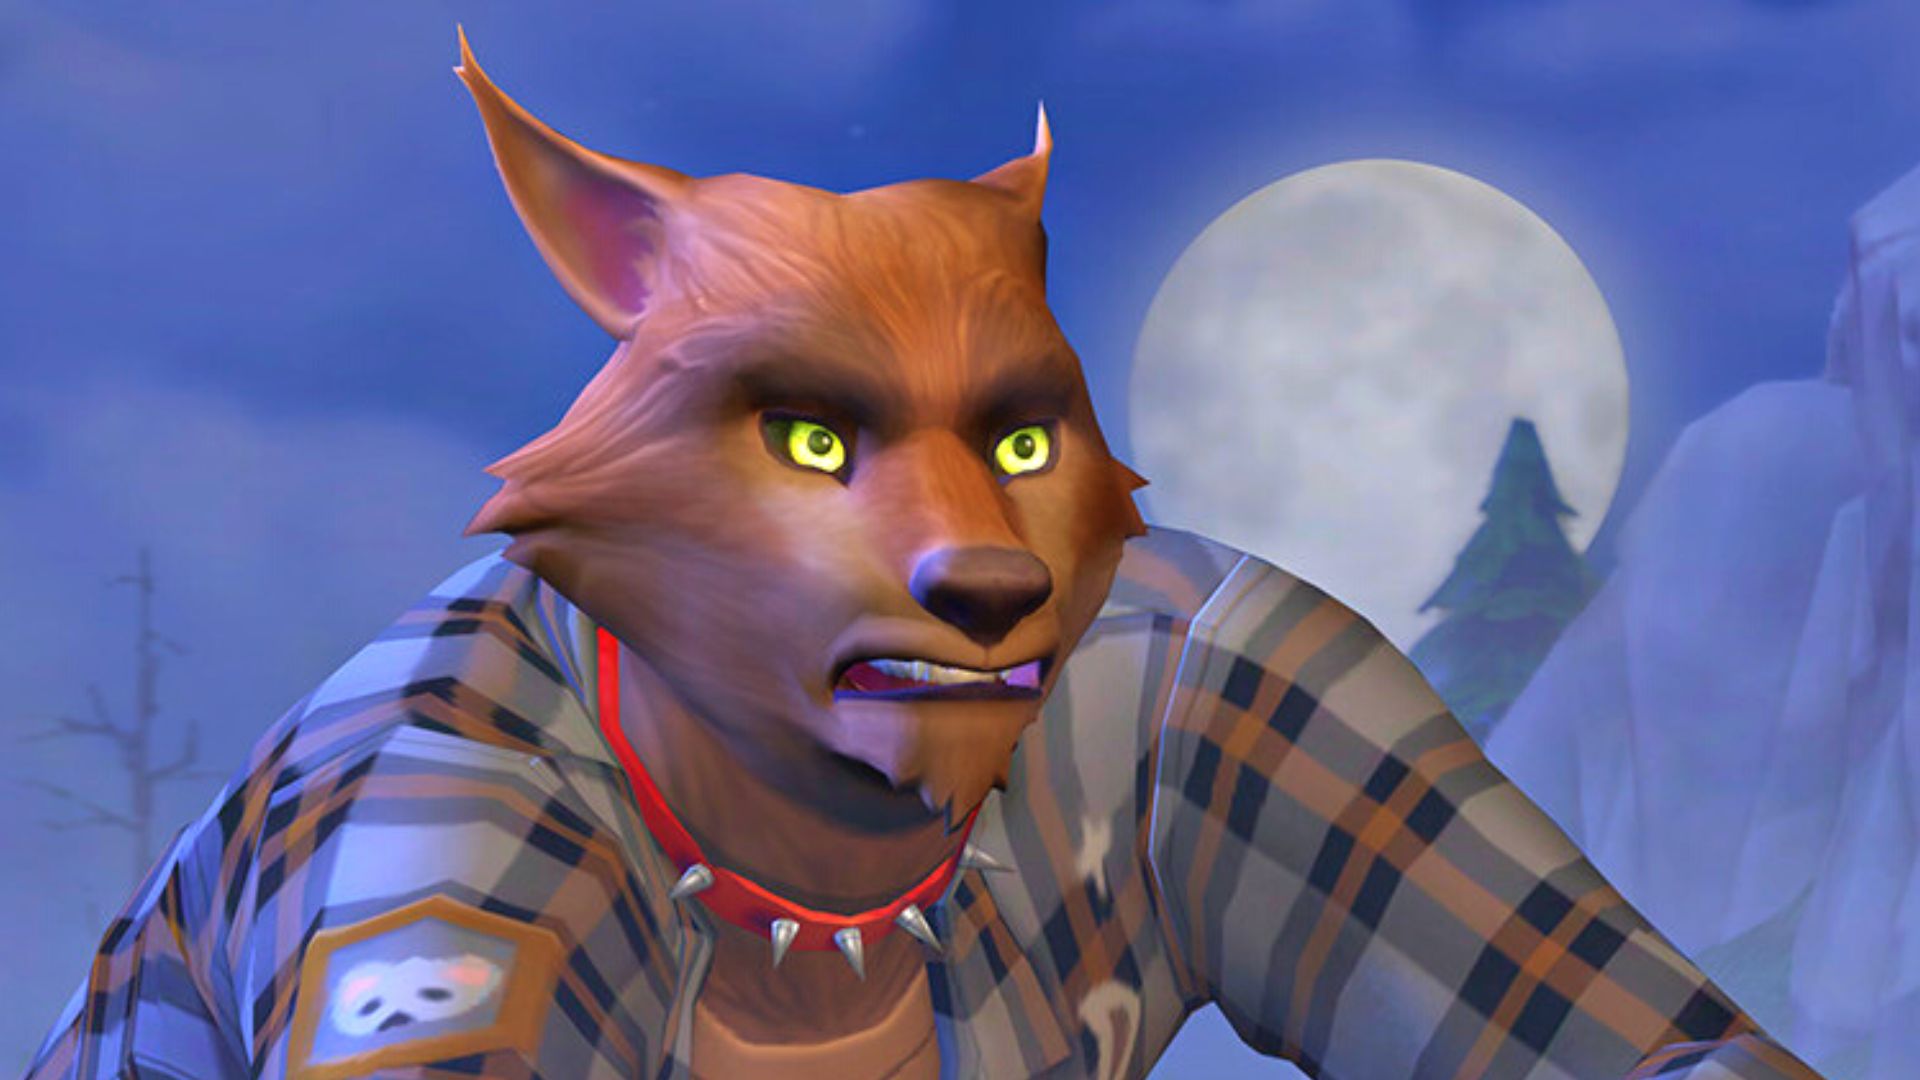 Sims 4 Werewolves now more picky in love and won't eat whiteboards